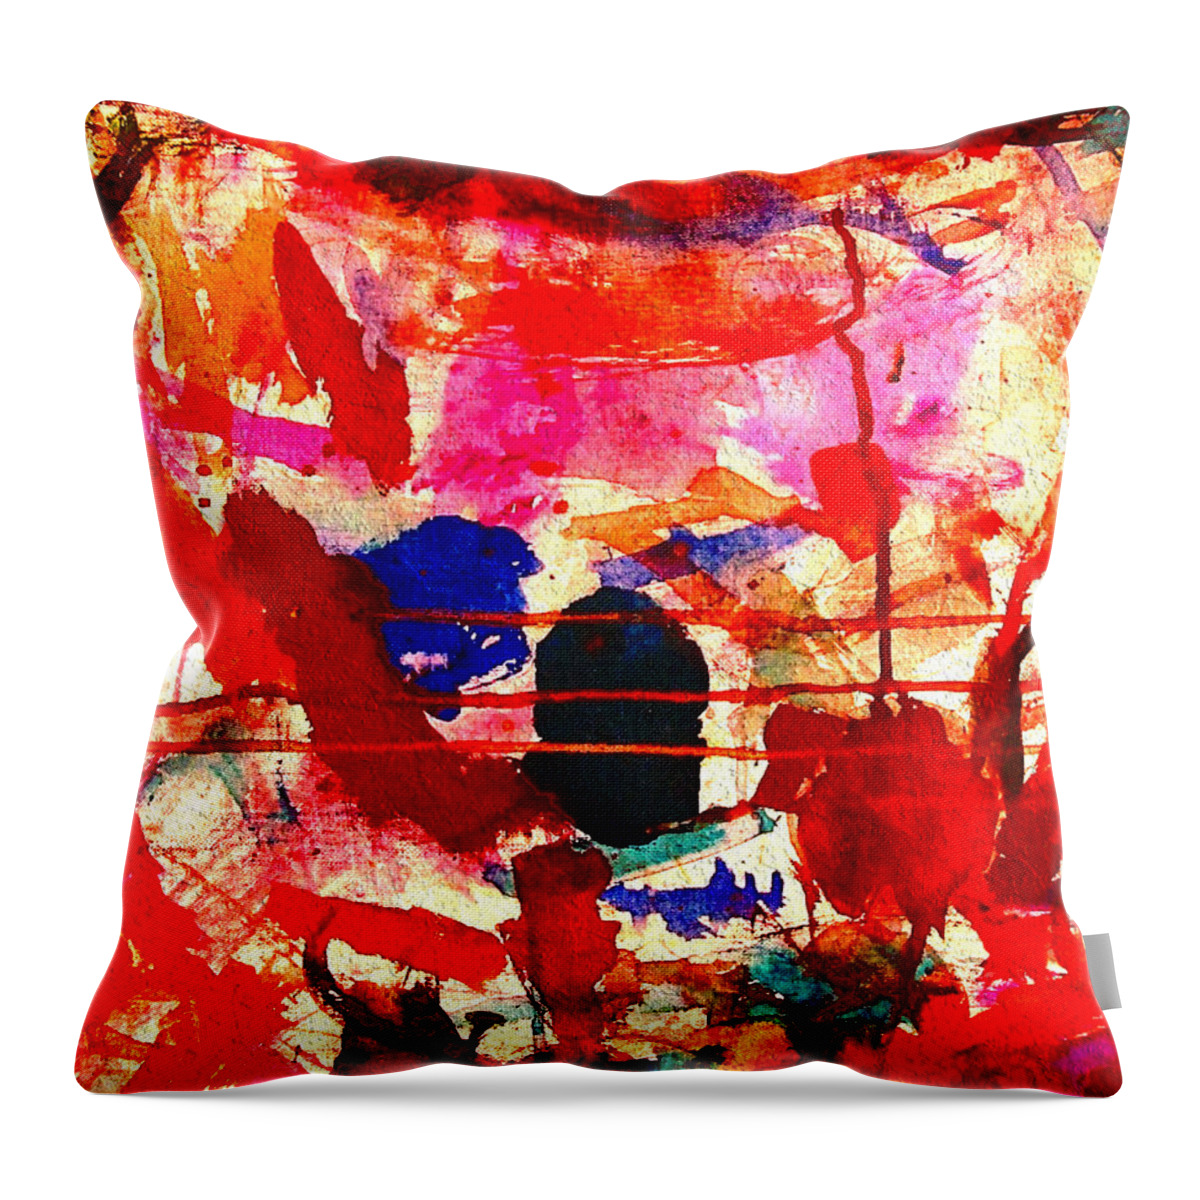 Natalie Holland Art Throw Pillow featuring the painting Celebrate Life by Natalie Holland